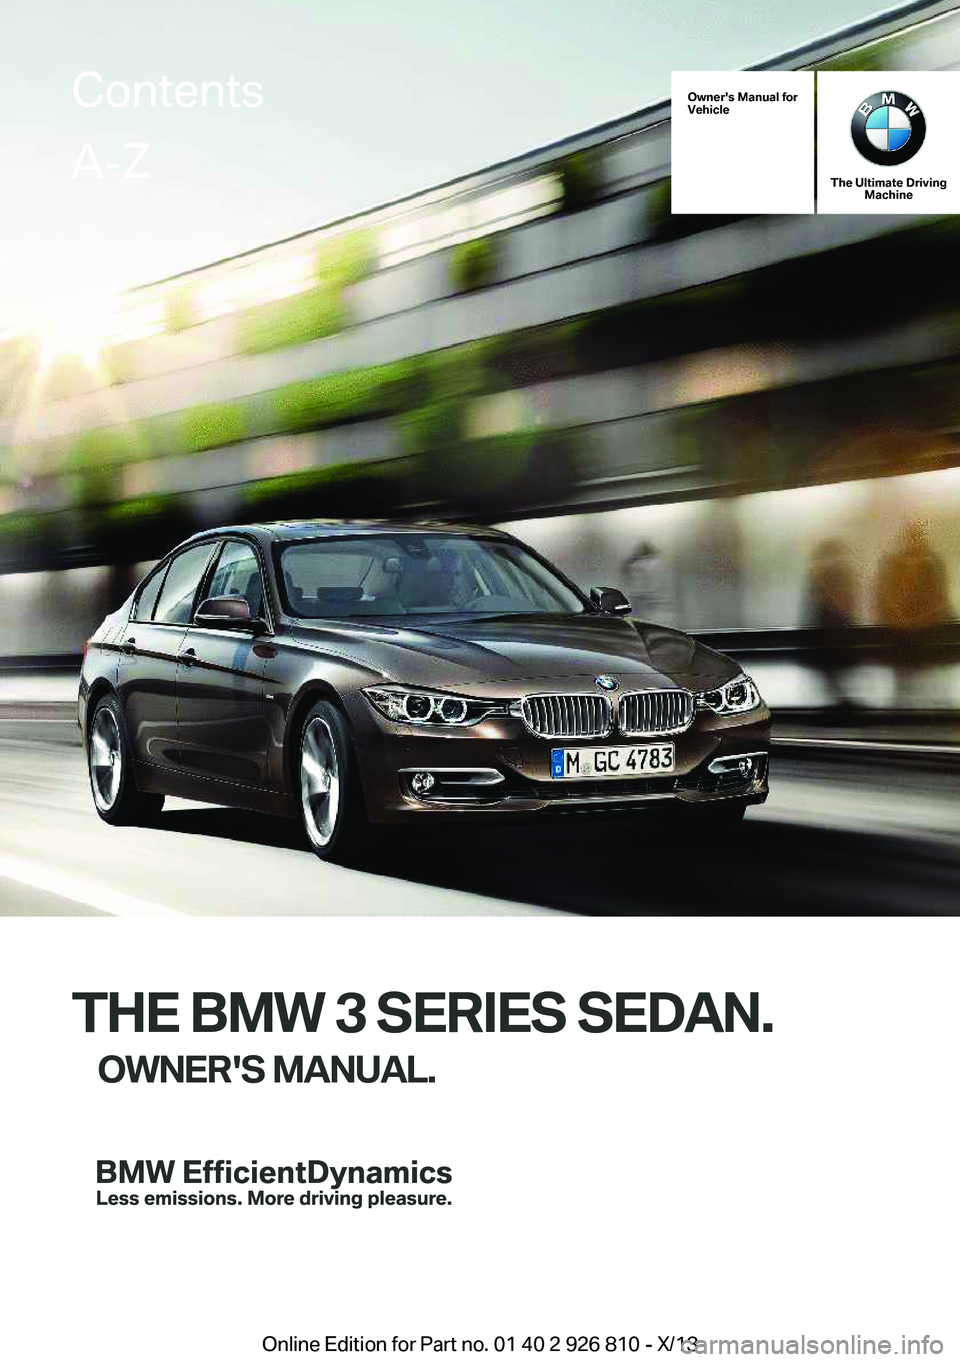 BMW 335I XDRIVE SEDAN 2013  Owners Manual Owner's Manual for
Vehicle
The Ultimate Driving Machine
THE BMW 3 SERIES SEDAN.
OWNER'S MANUAL.
ContentsA-Z
Online Edition for Part no. 01 40 2 926 810 - X/13   